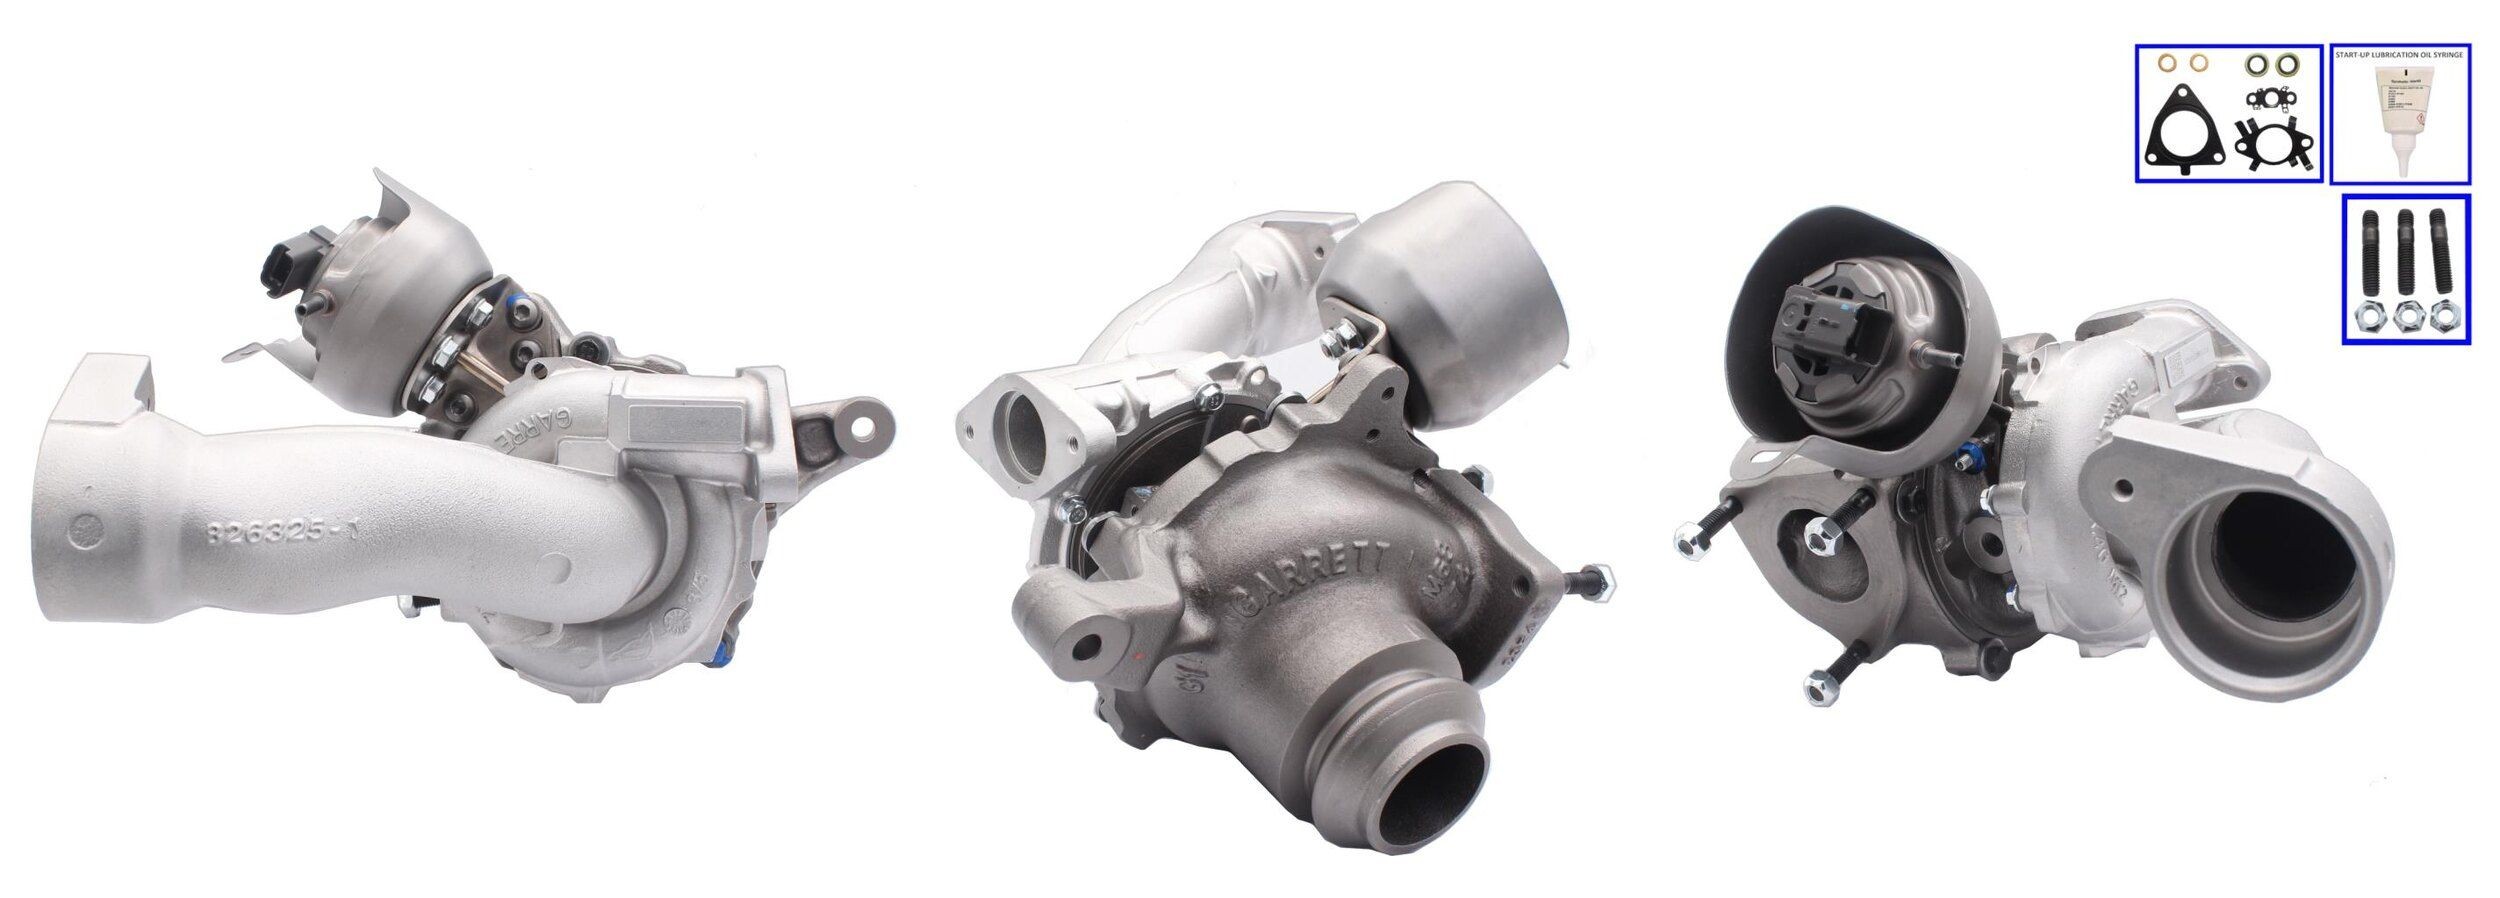 TURBO MOTOR PA8074891 Turbocharger Exhaust Turbocharger, Electrically controlled actuator, with gaskets/seals